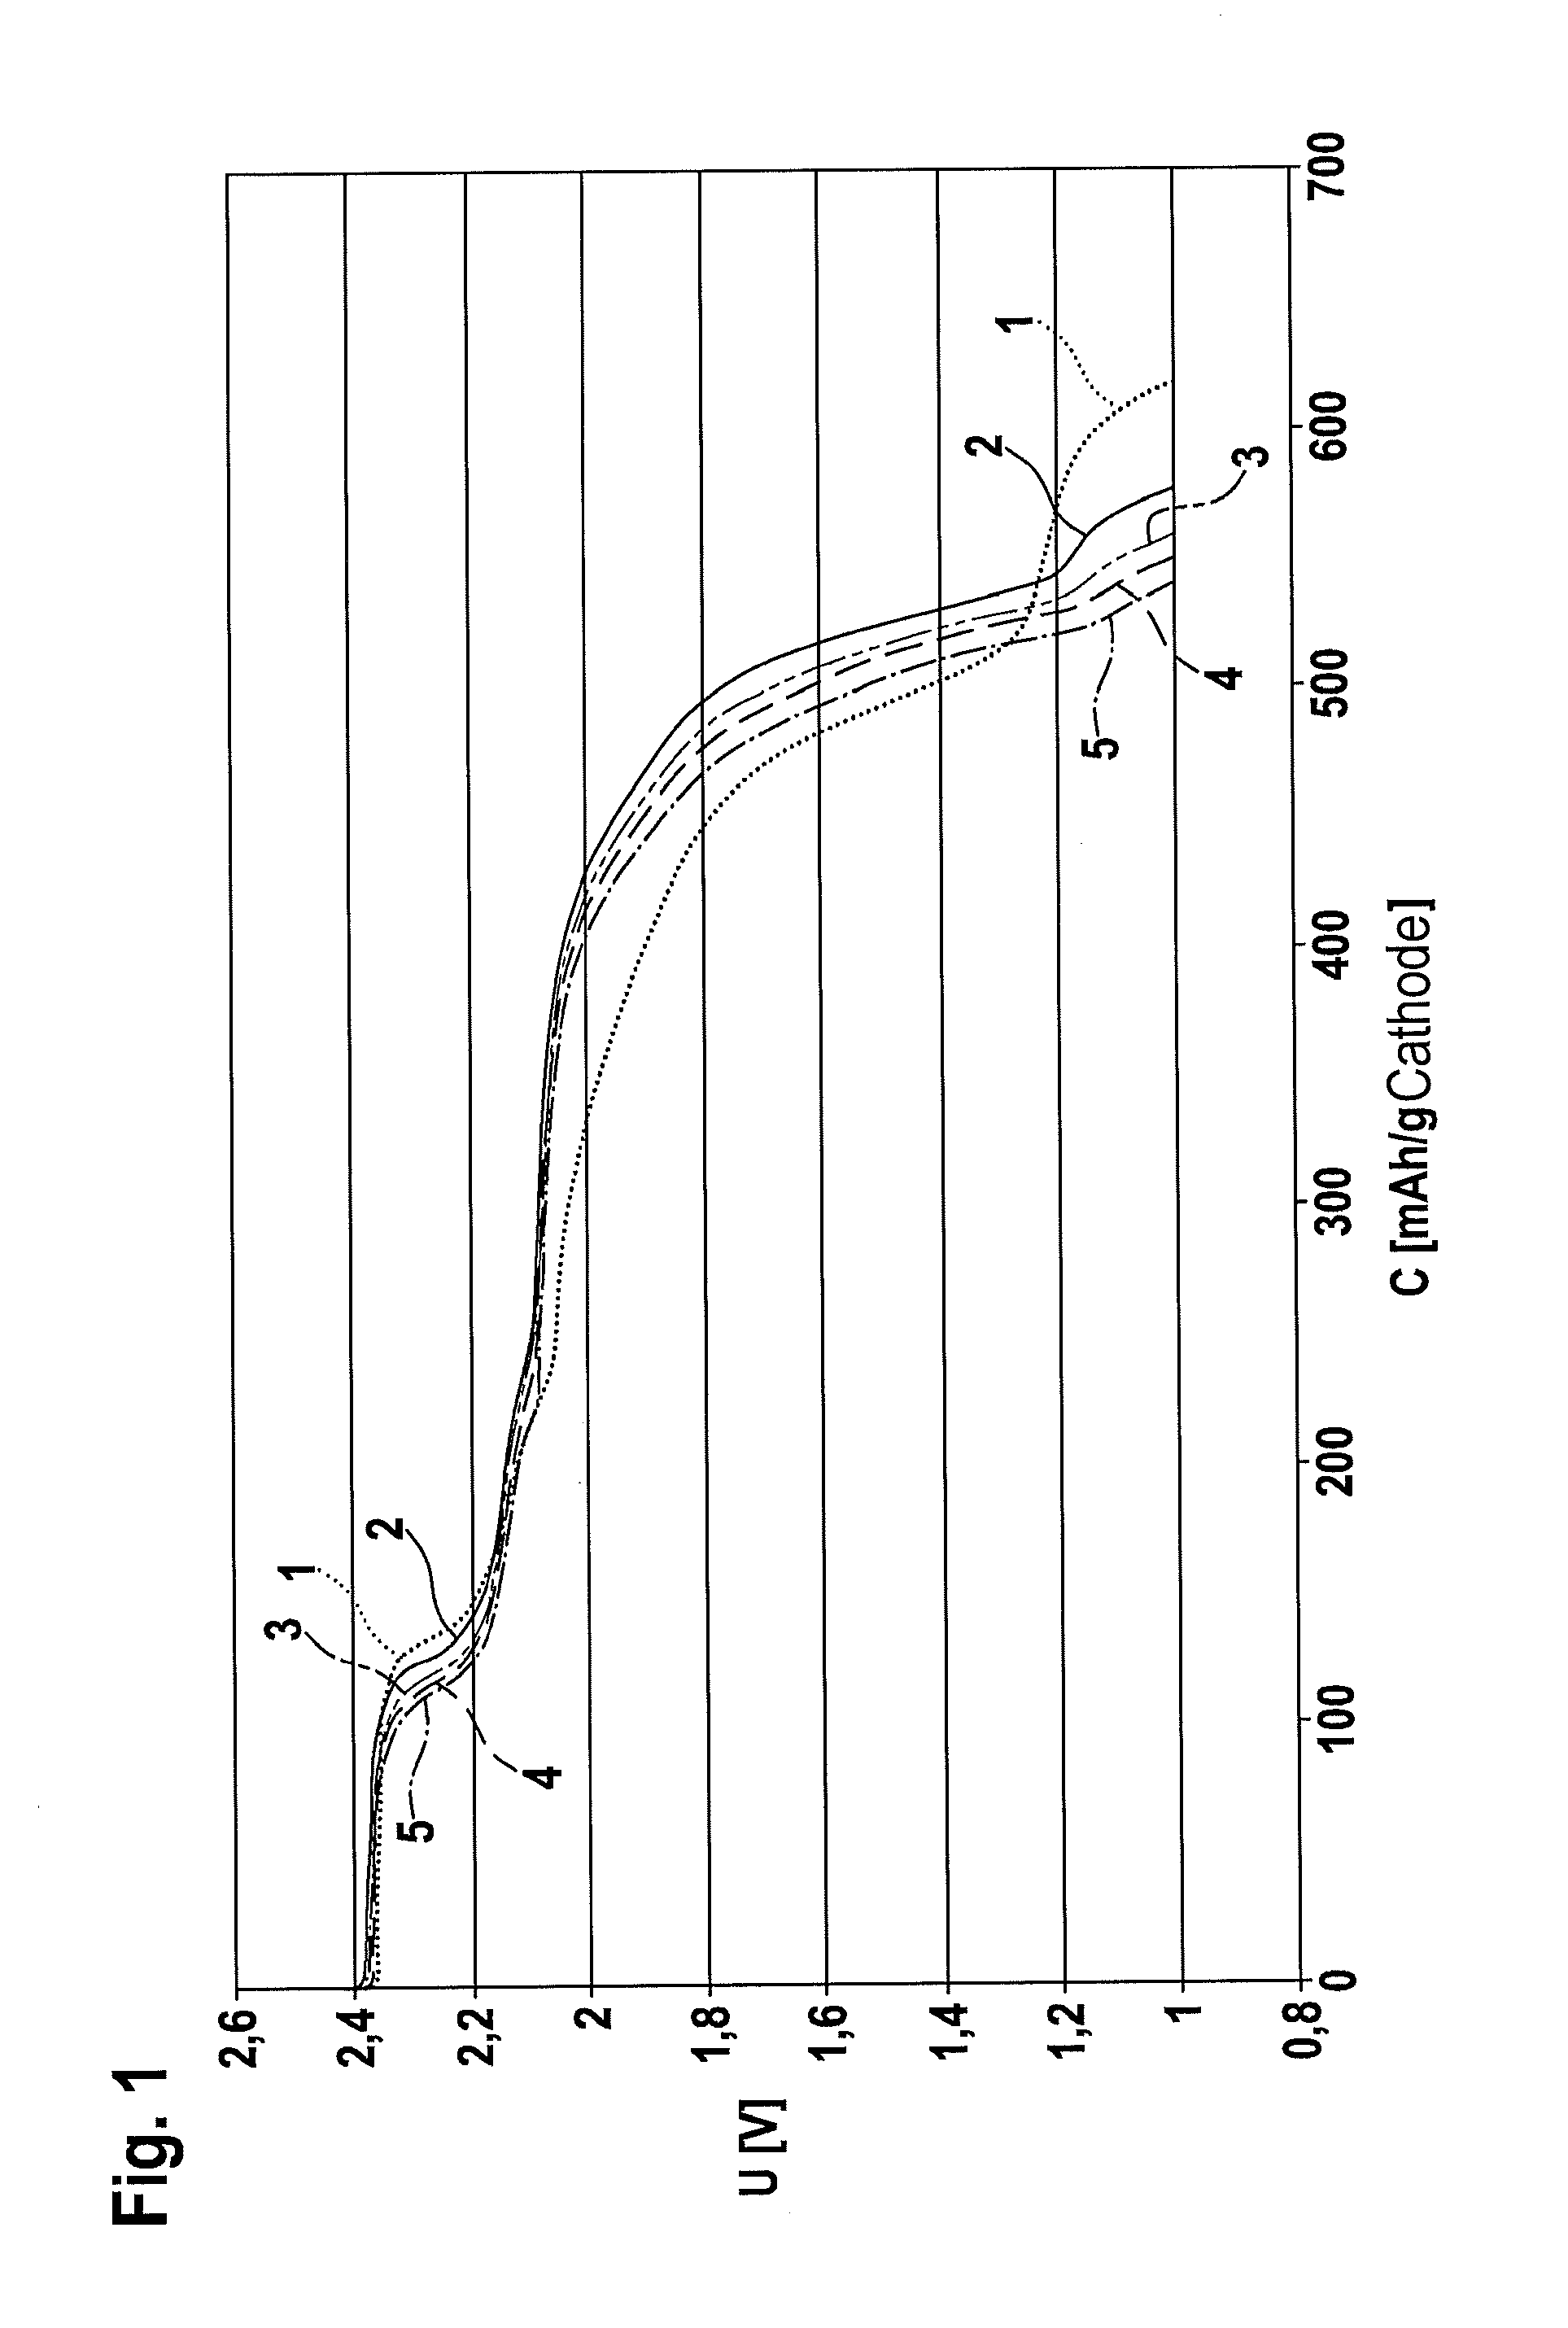 Cathode material for a lithium-sulfur battery